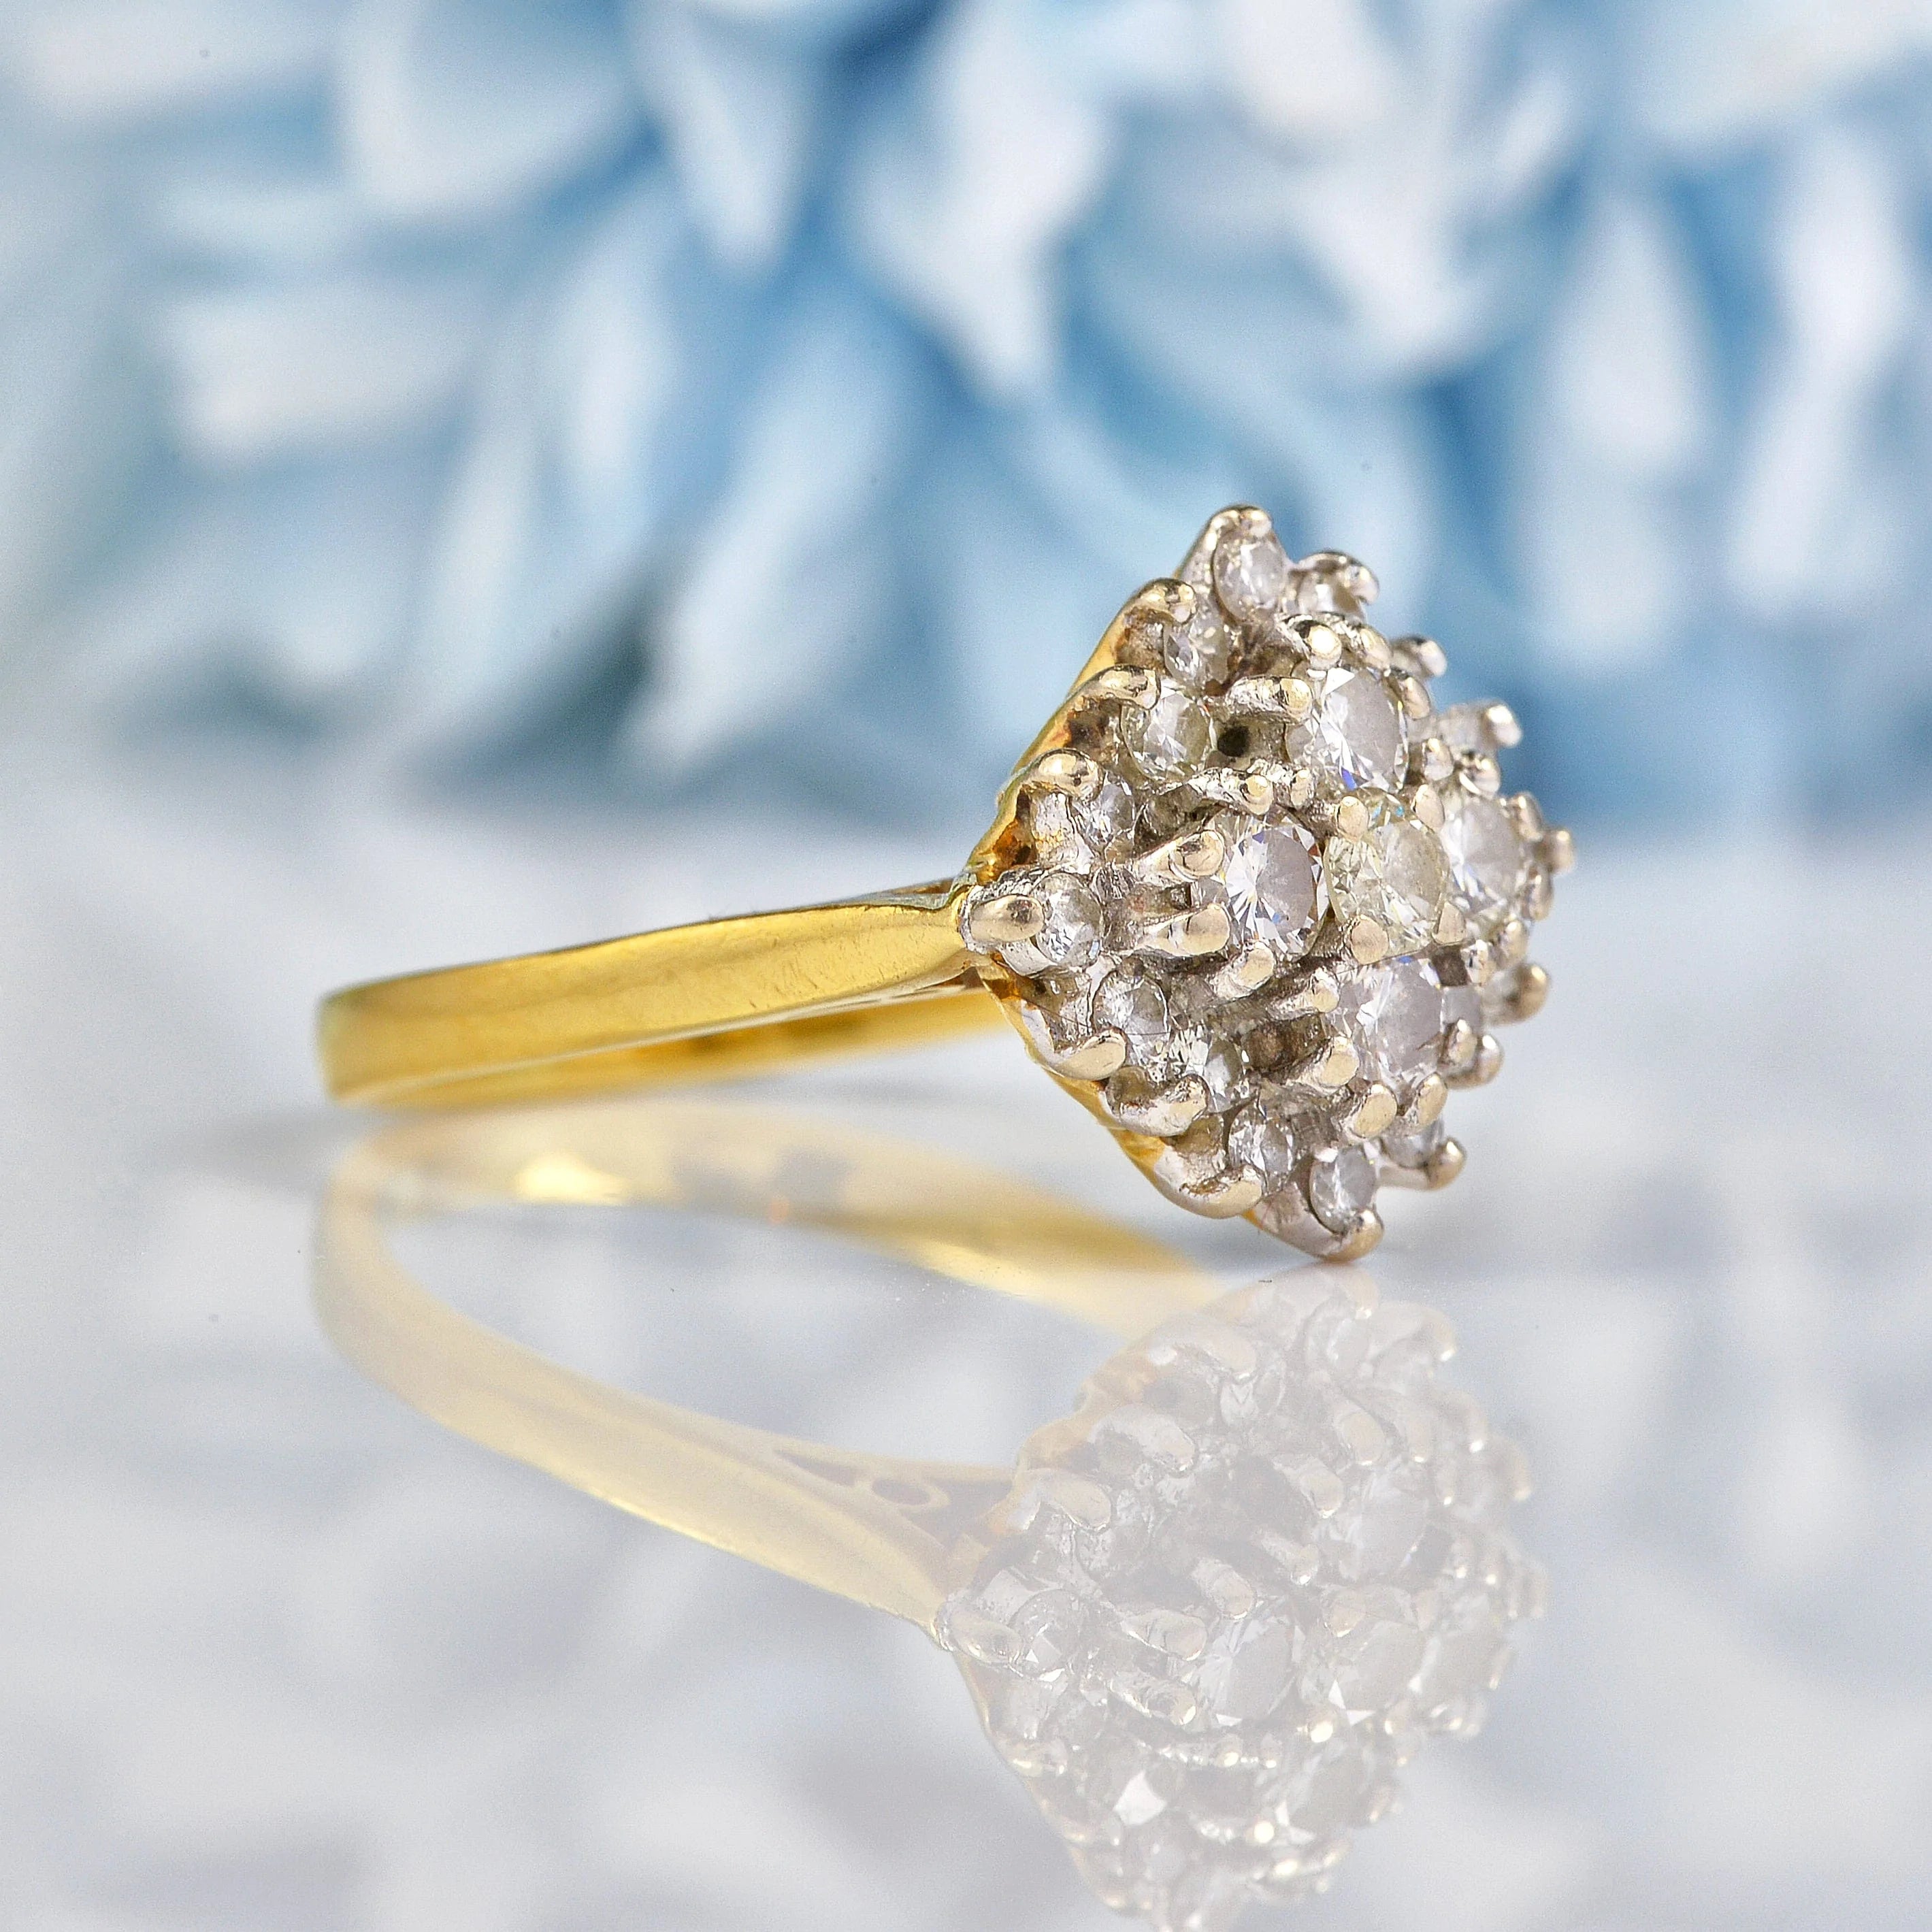 Ellibelle Jewellery Vintage 1969 Diamond 18ct Gold Cluster Ring (0.82cts)